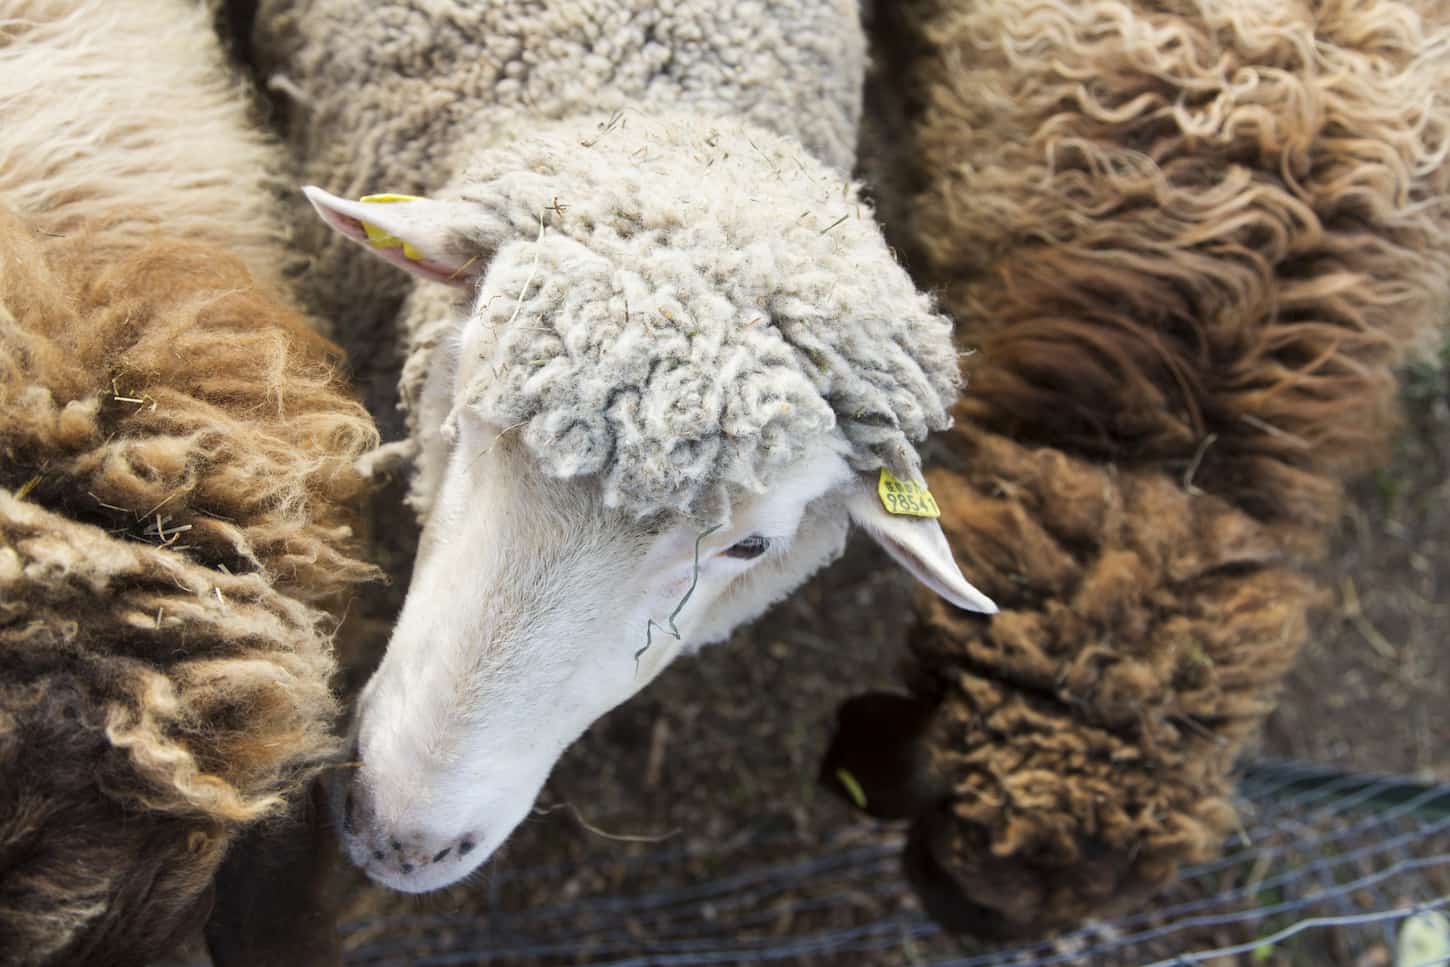 An image of an Overhead view of a white sheep in between brown sheep.